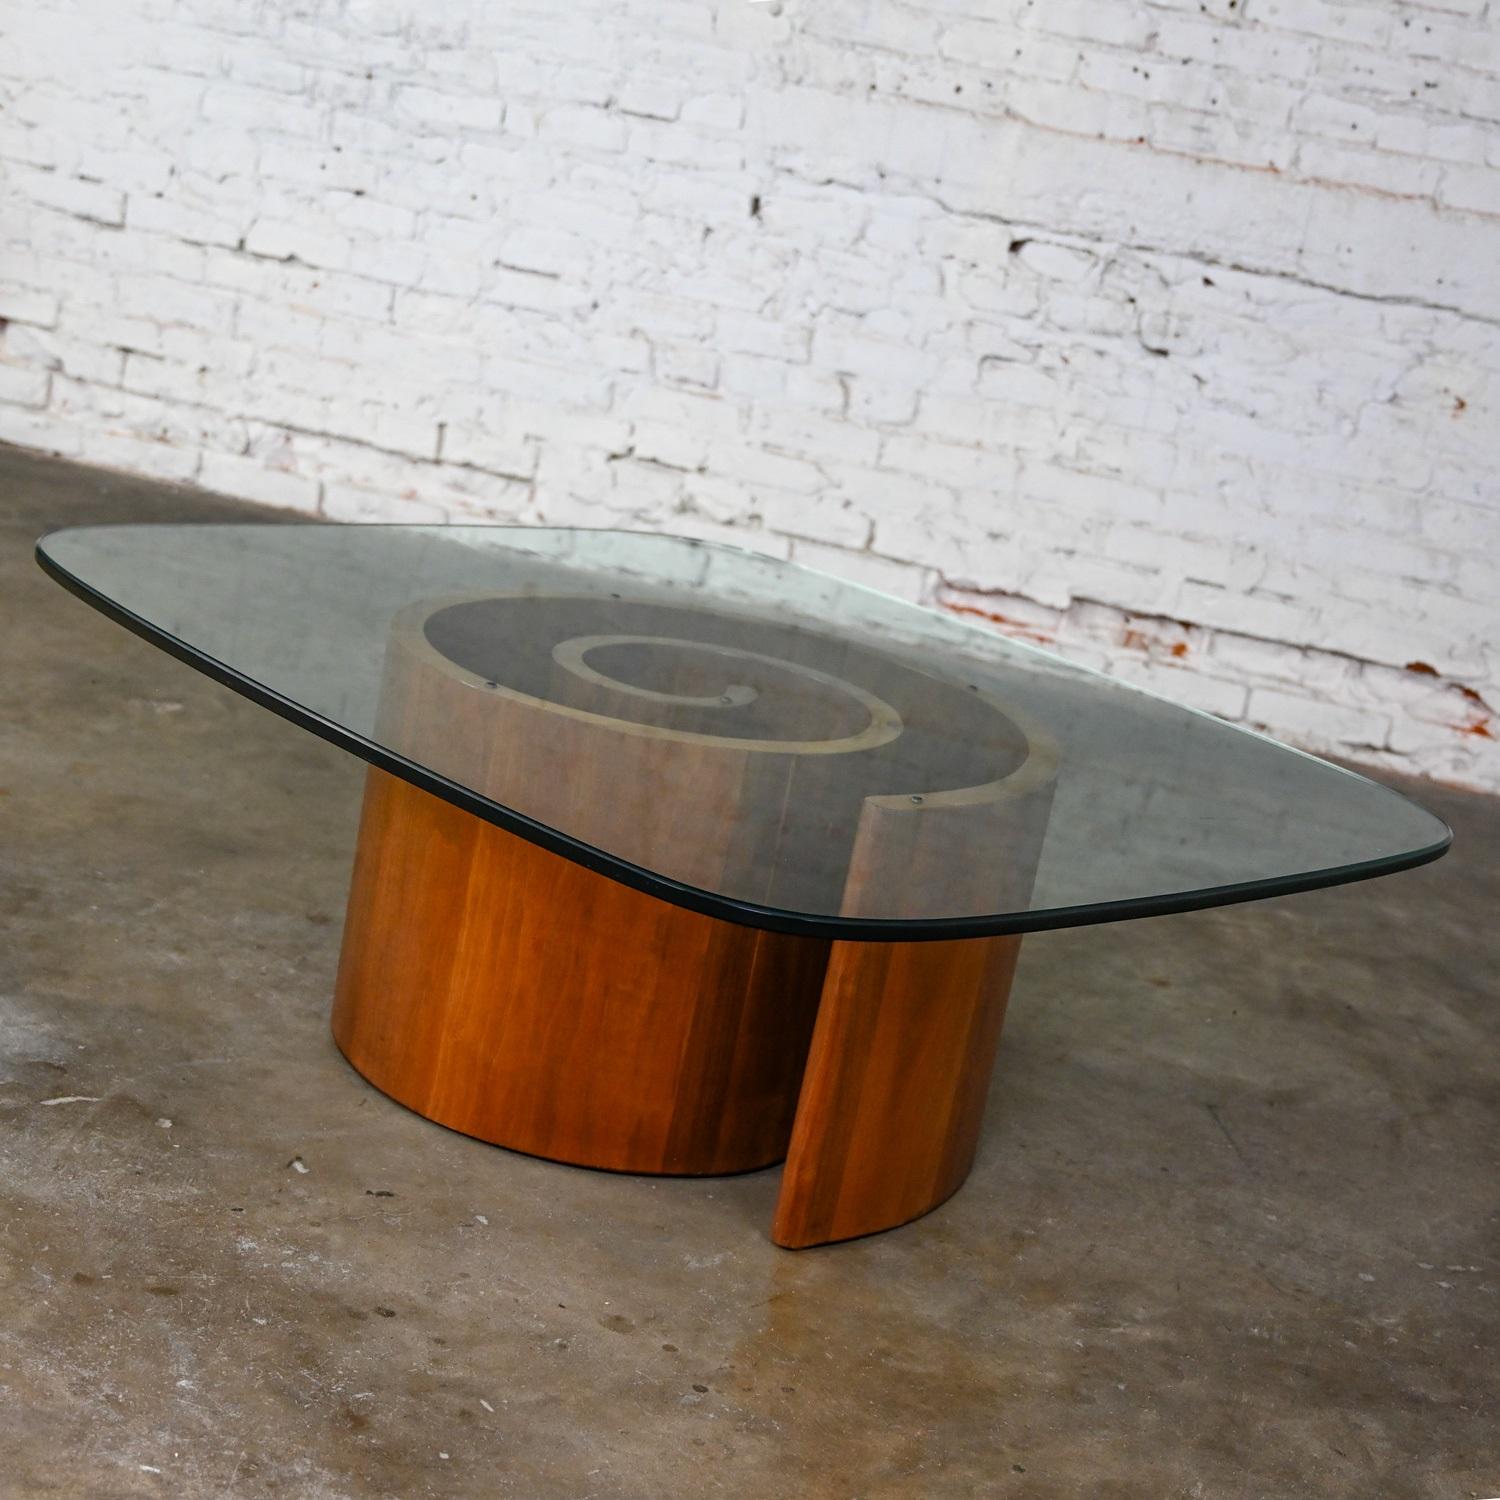 Mid-Century Modern Coffee Table Walnut Spiral or Snail Pedestal with Glass Top In Good Condition For Sale In Topeka, KS